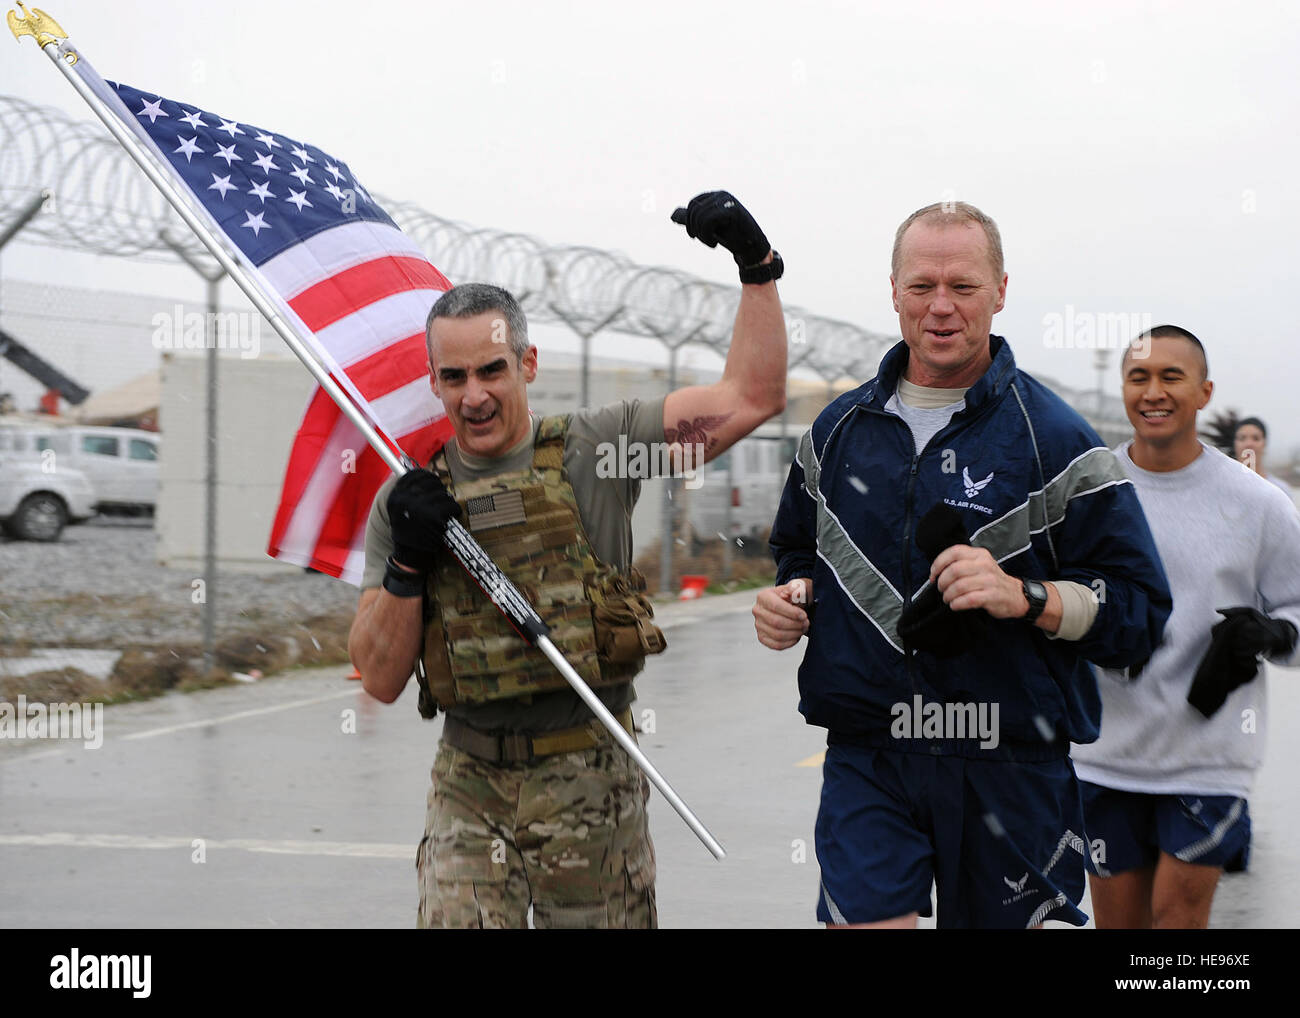 U.S. Air Force Brig. Gen. Mark Kelly, 455th Air Expeditionary Wing commander, and U.S. Air Force Chief Master Sgt. Ramon 'CZ' Colon-Lopez, Air Force Central Command command chief, run with a flag bearing the names of seven special operators who were killed March 4, 2002 during Operation Anaconda: U.S. Air Force Senior Airman Jason Cunningham, U.S. Army Cpl. Matthew Commons, U.S. Army Spc. Marc Anderson, U.S. Army Sgt. Phillip Svitak, U.S. Army Sgt. Bradley Crose, U.S. Navy Petty Officer 1st Class Neil Roberts and U.S. Air Force Tech. Sgt. John Chapman, March 4, 2015 at Bagram Air Field, Afghan Stock Photo